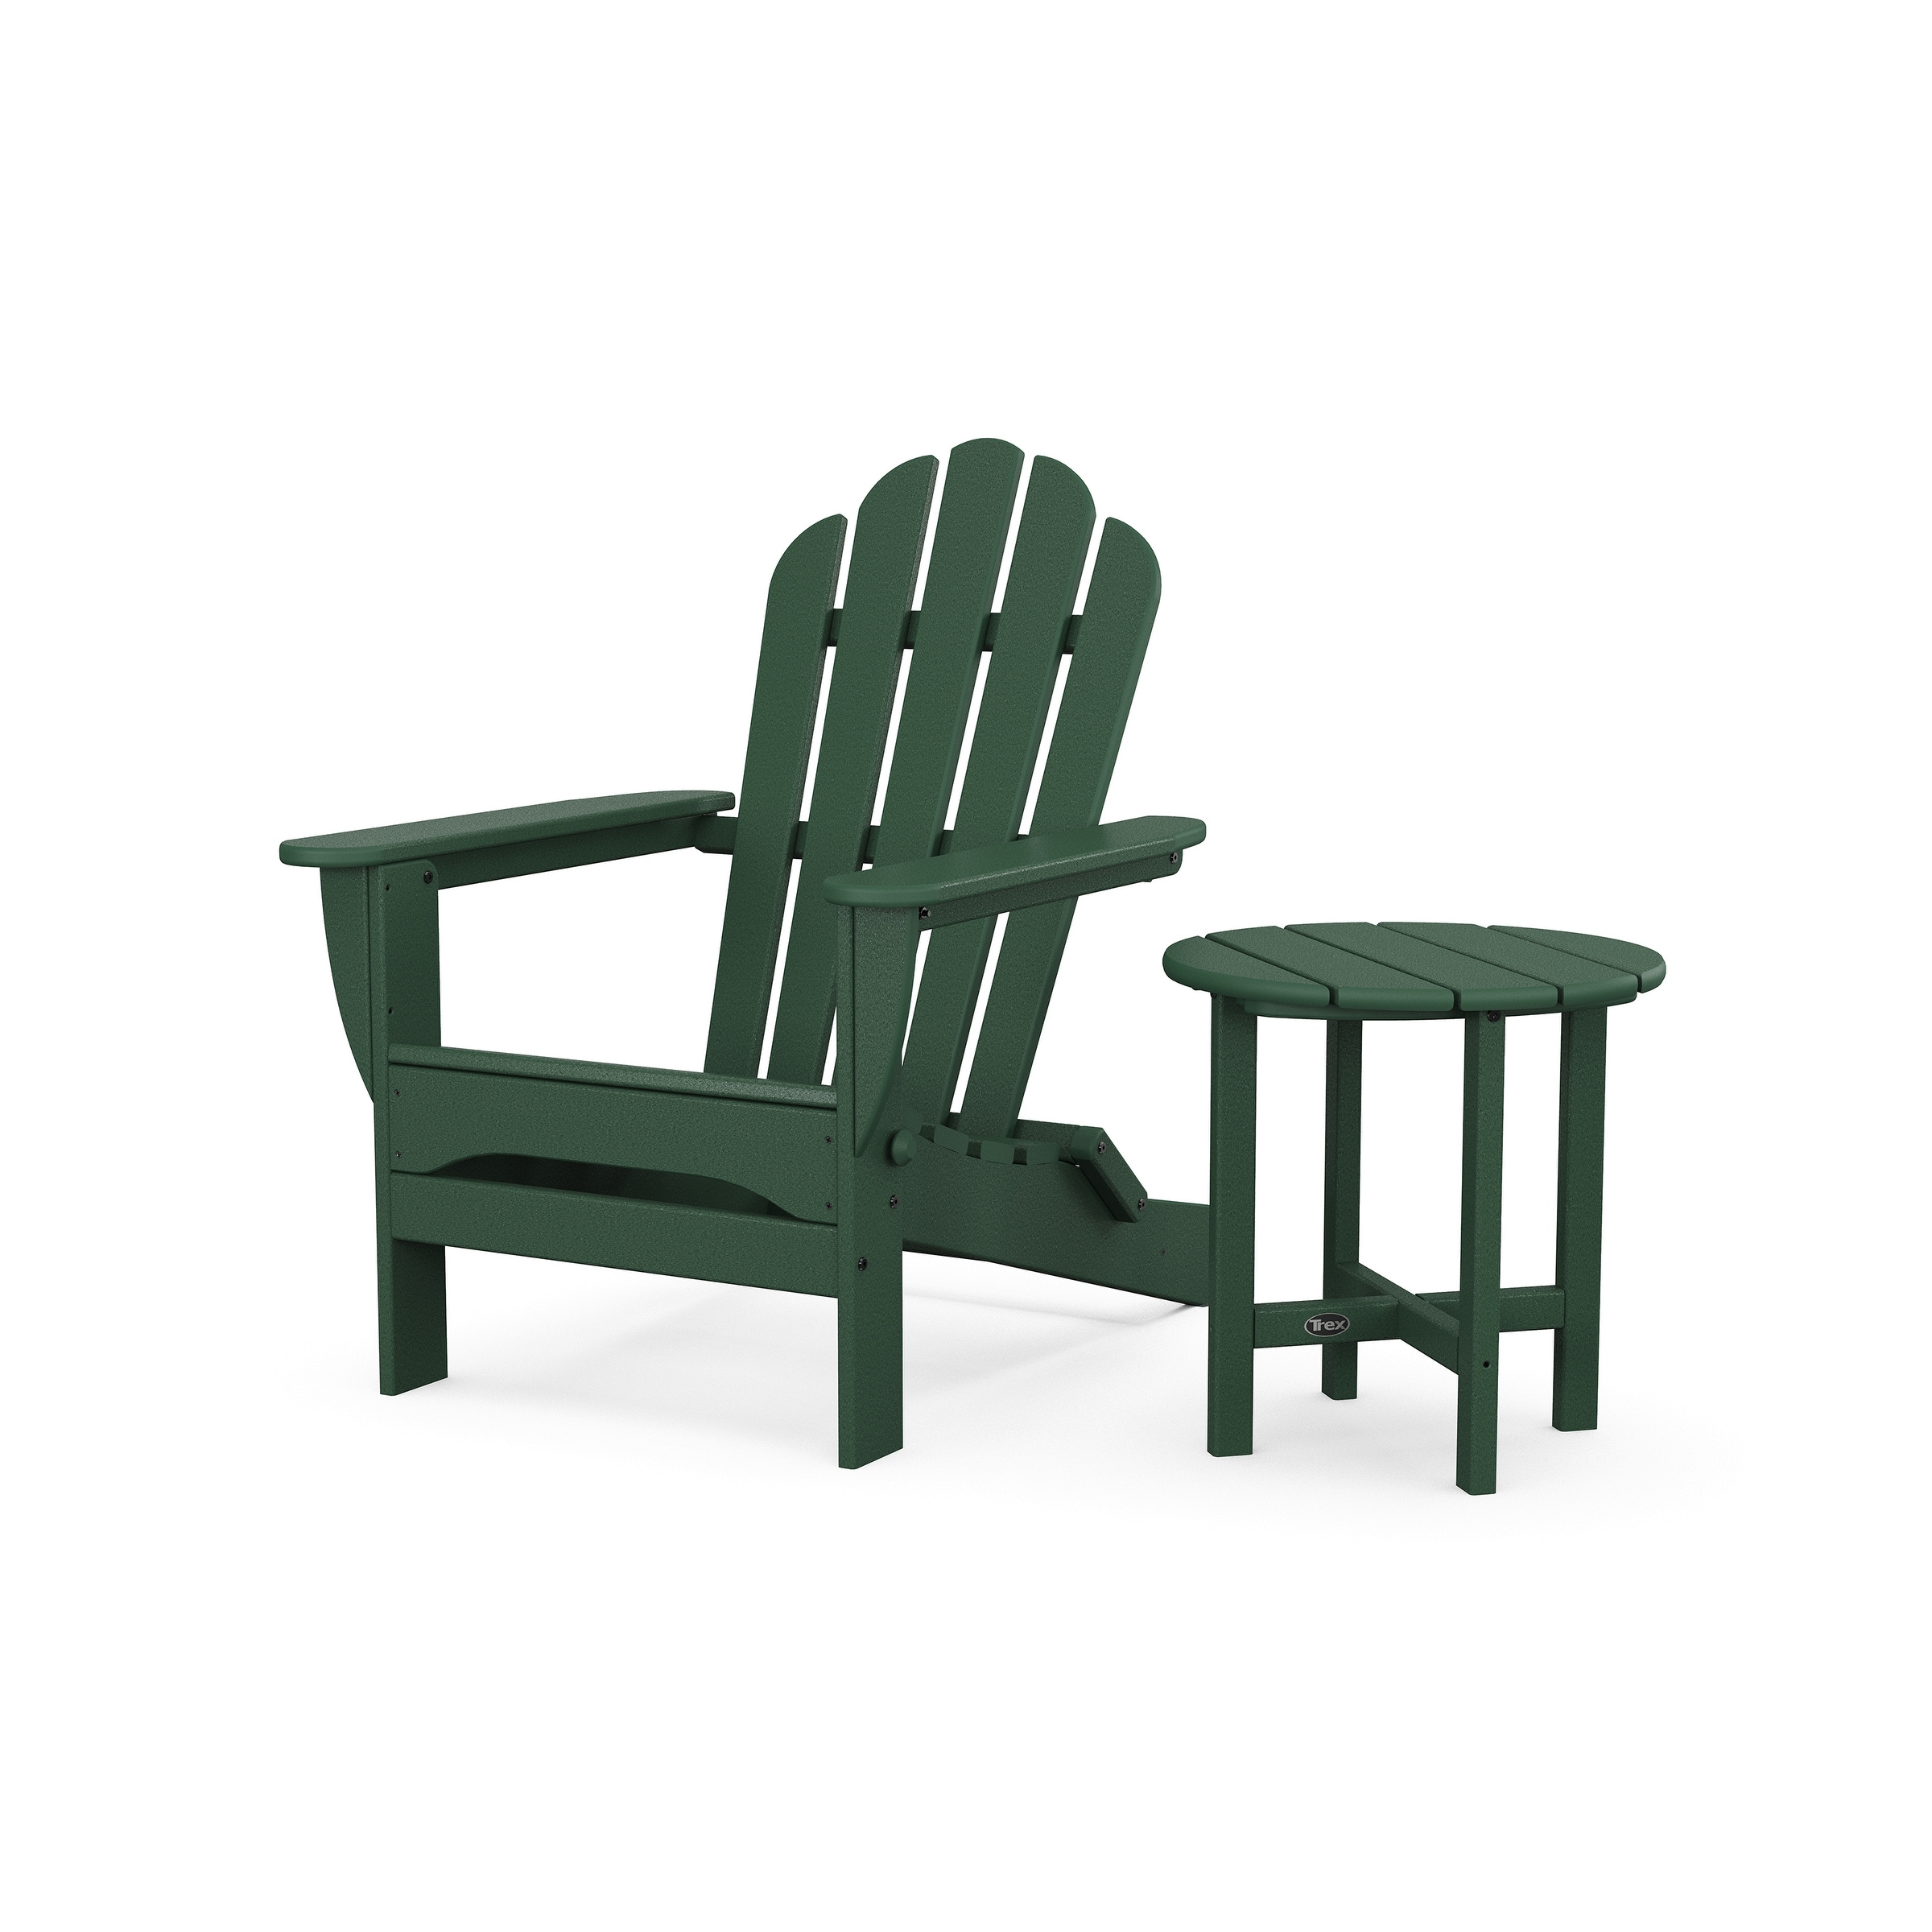 Monterey Bay Folding Adirondack Chair With Side Table